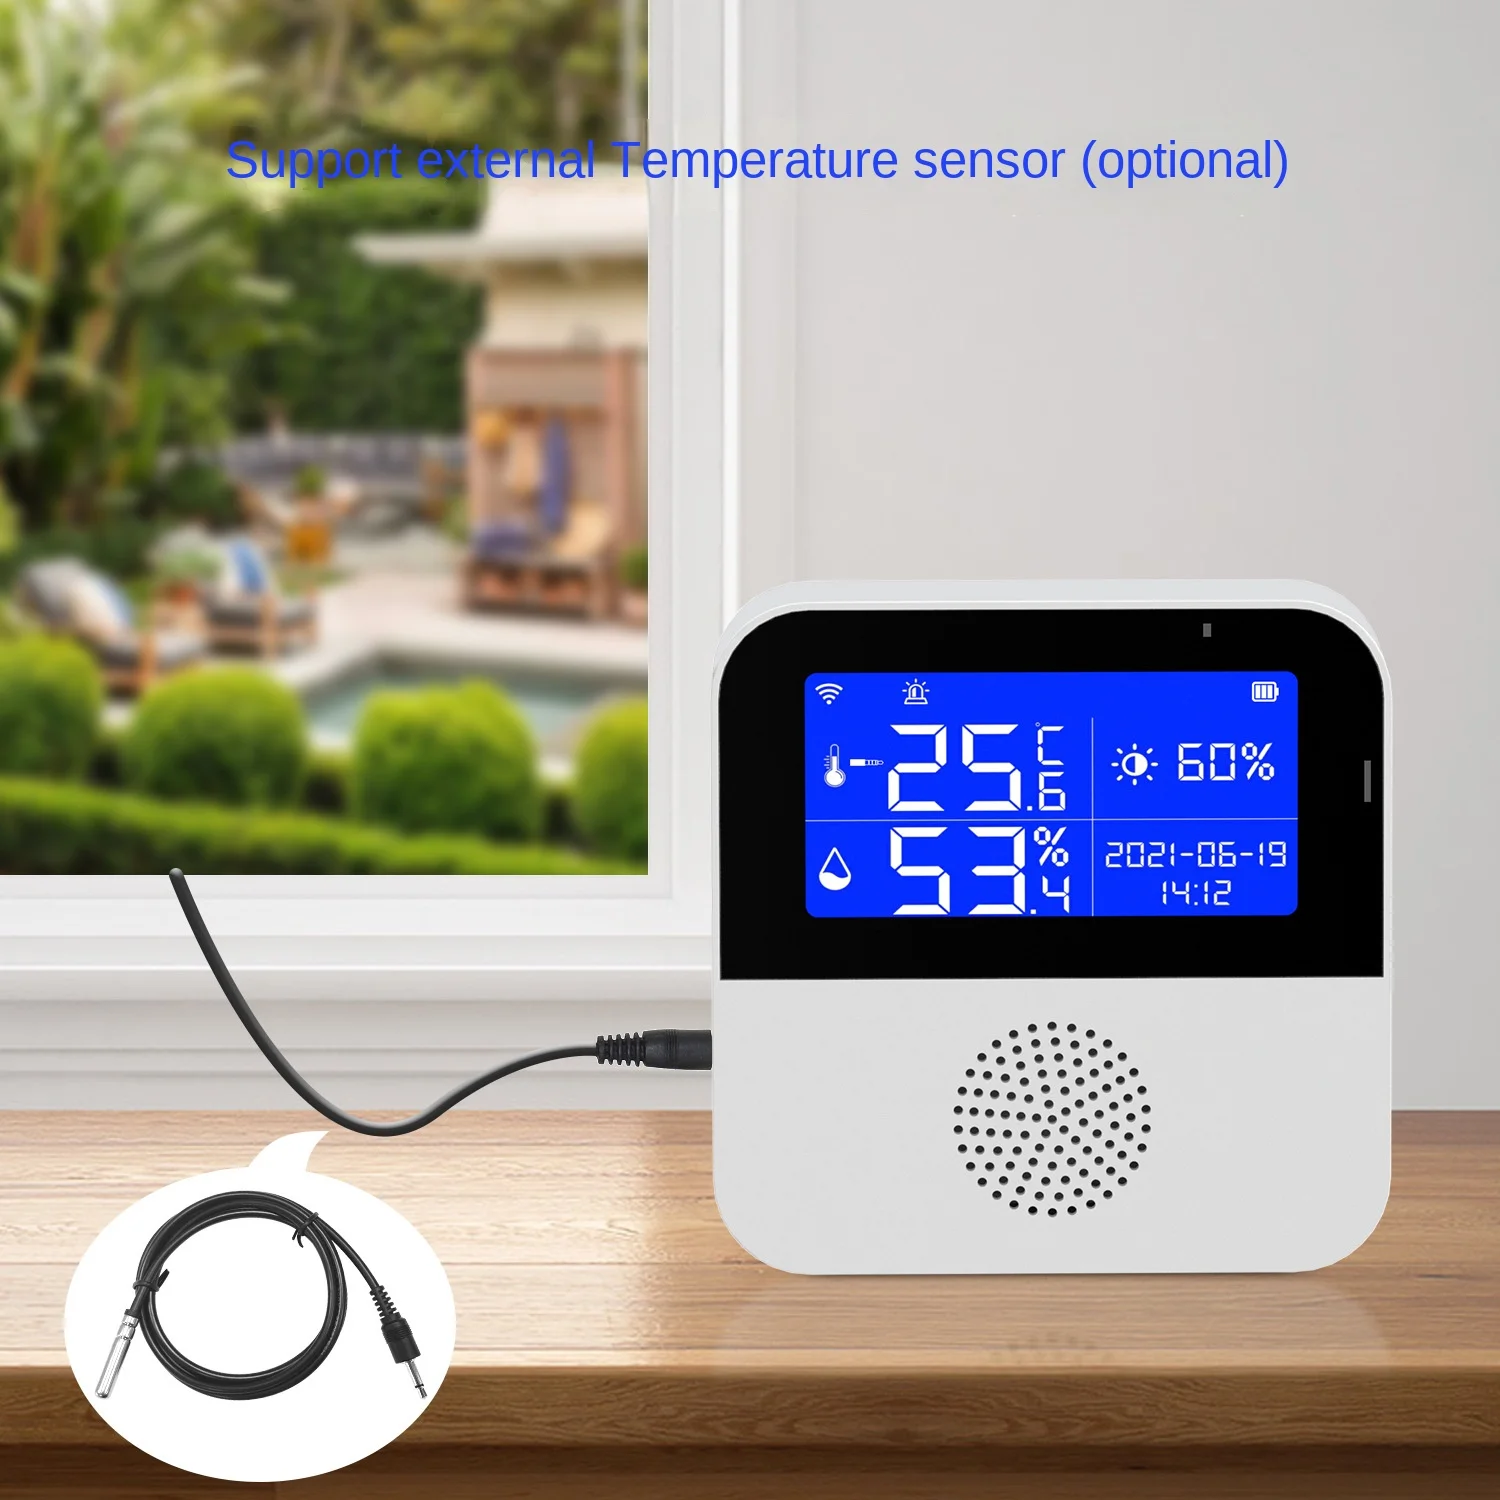 https://ae01.alicdn.com/kf/Sf3fa0973ea2c4d839f0f43b1851f8078K/Tuya-WiFi-Temperature-Humidity-Sensor-LCD-Display-Smart-Life-Remote-Monitor-Indoor-Thermometer-Hygrometer-Meter-Support.jpg